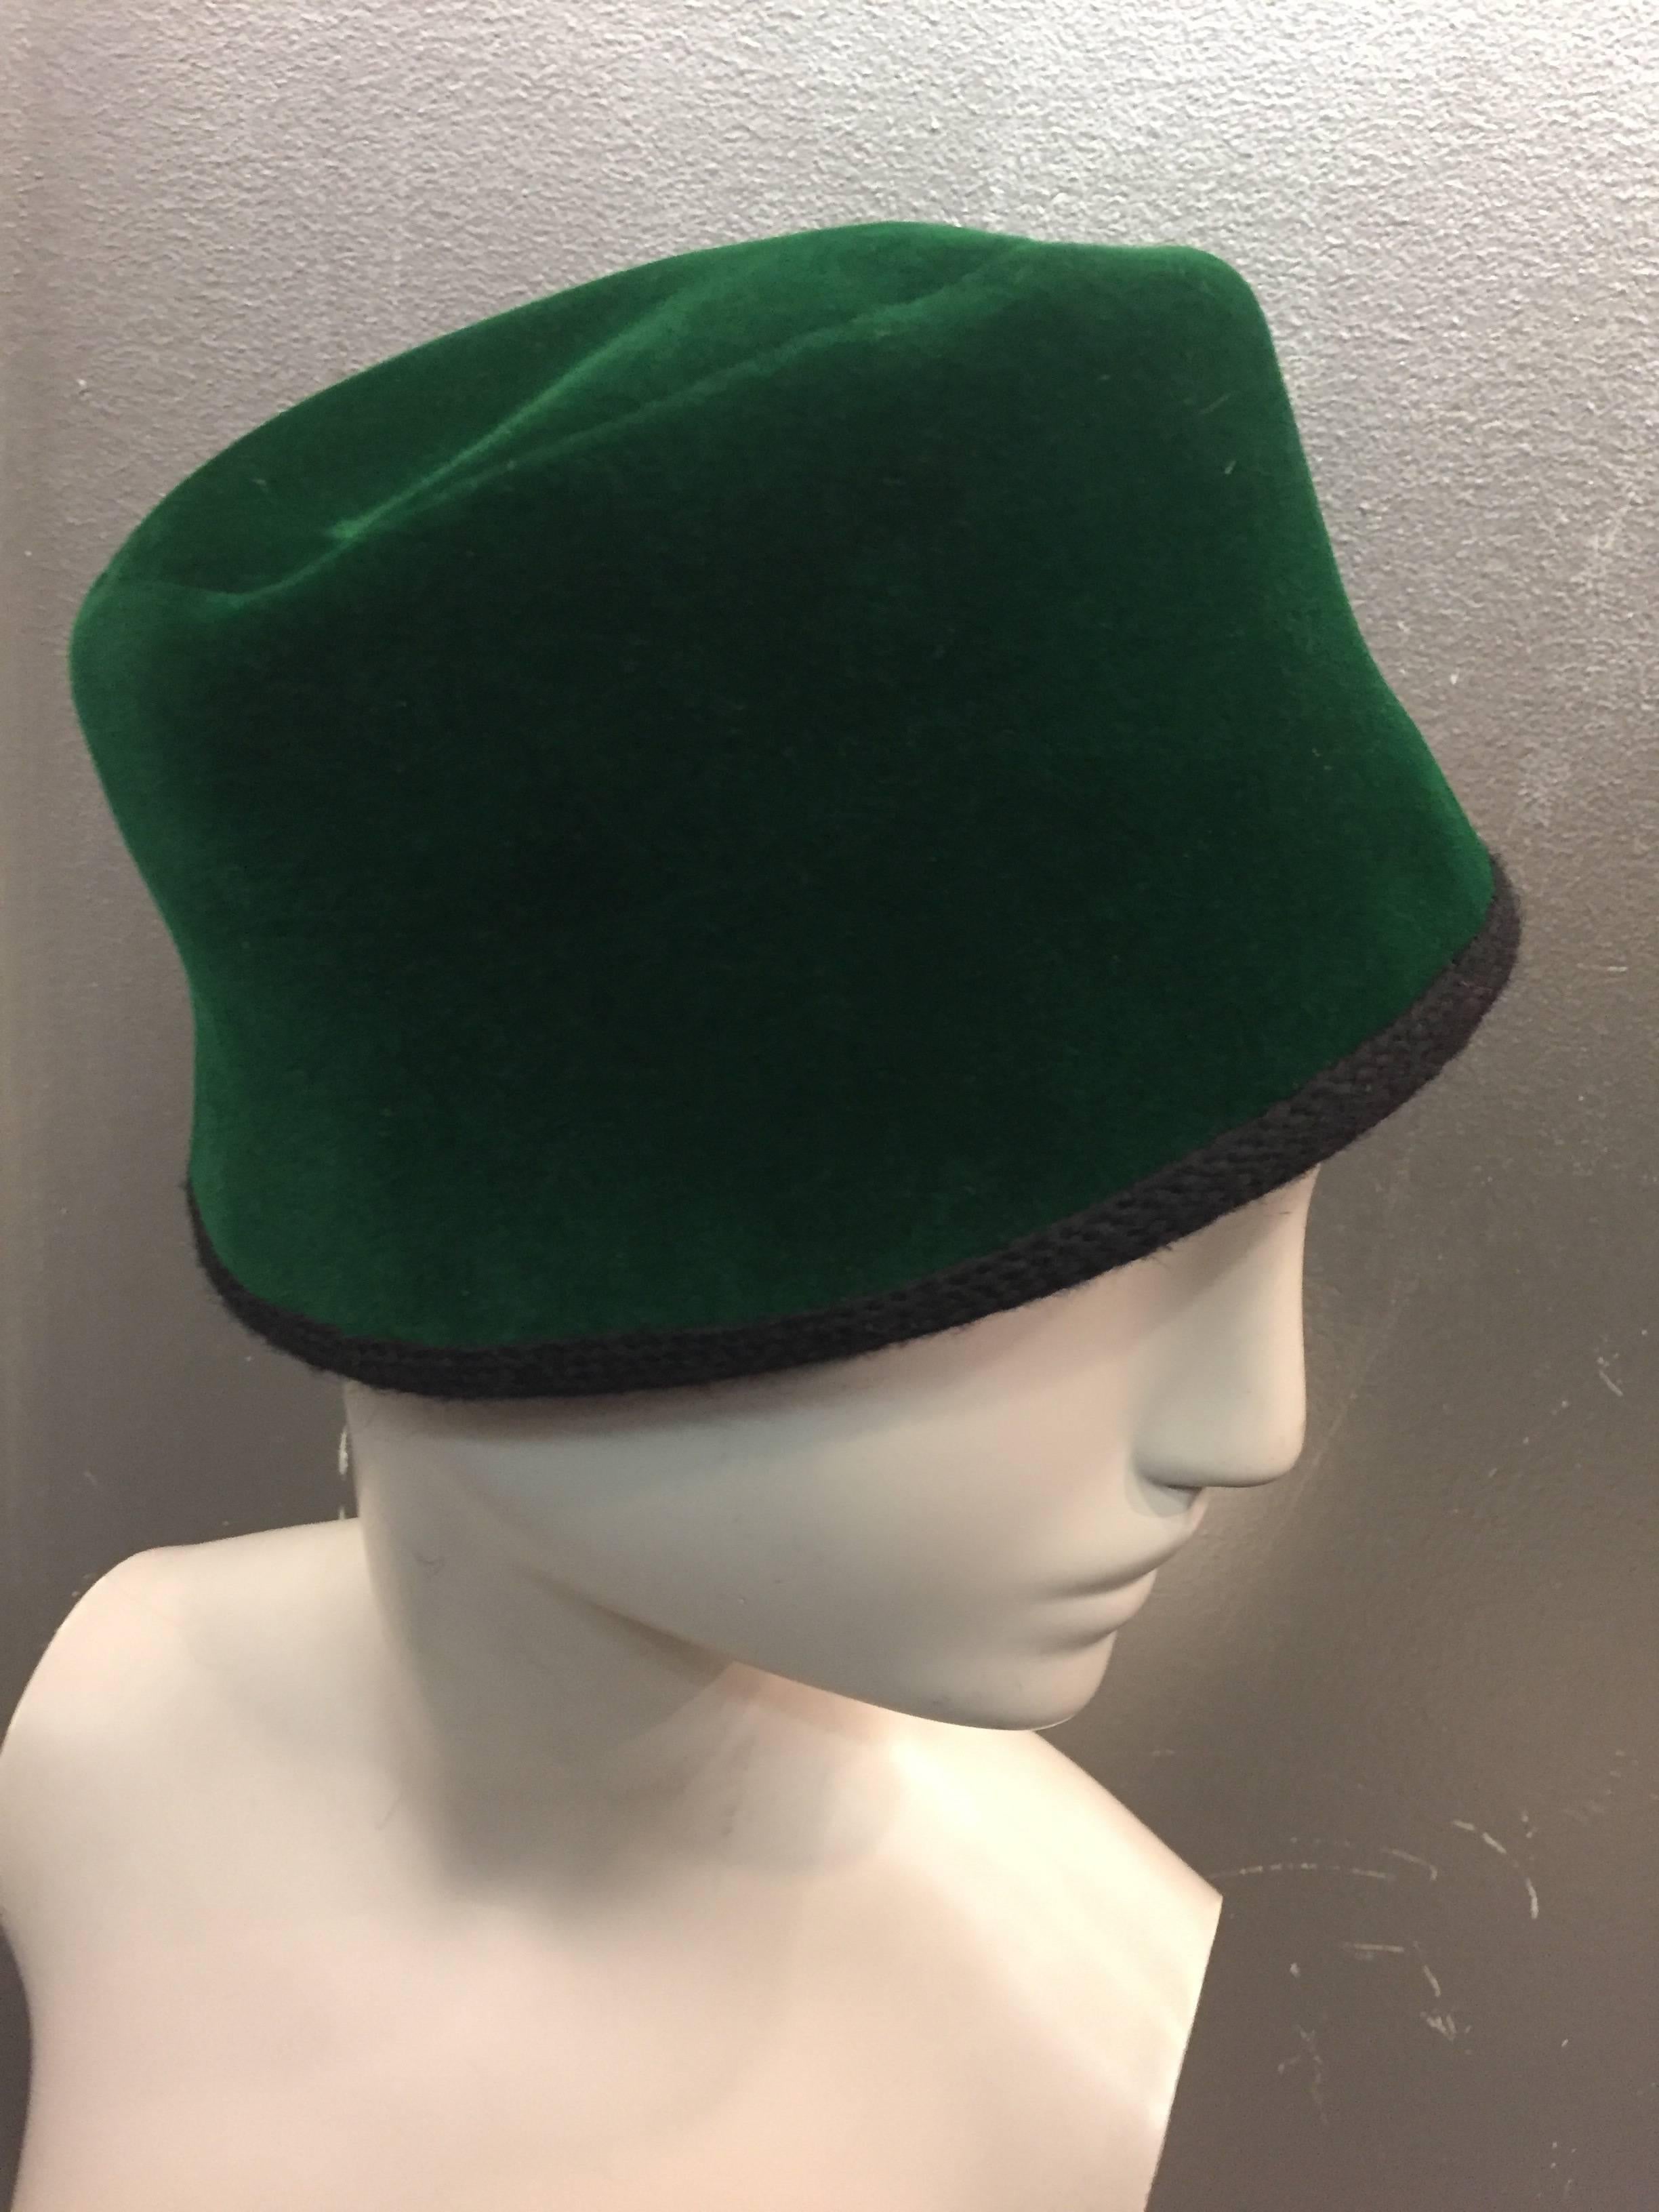 This1960s Christian Dior Evergreen Velvet Felt Fez has a chic black knit back bow.  The inside circumference measures 22 inches and is trimmed in black wool knit.  The crown measures 4 inches tall.  Made in France.